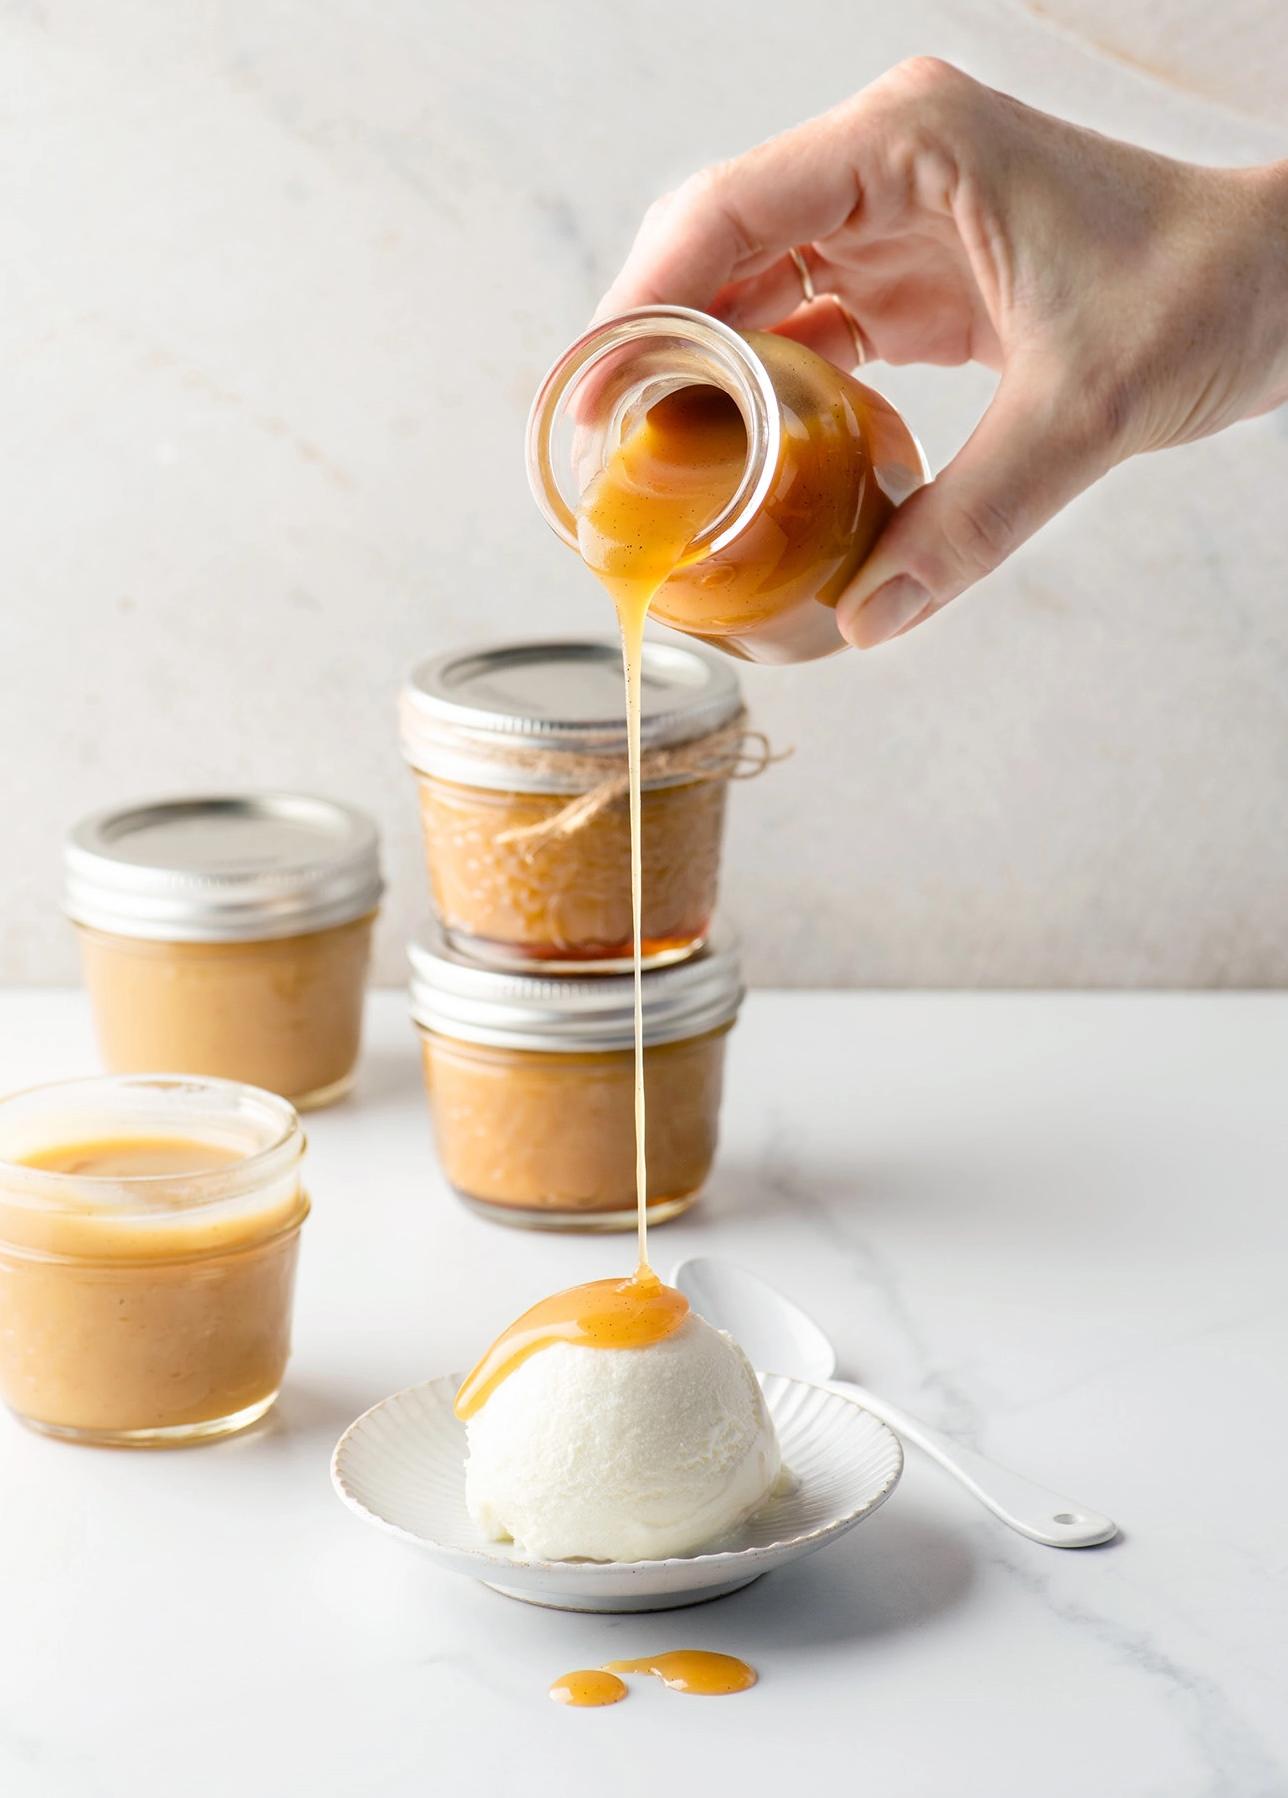  Indulge without the guilt, thanks to this rich and creamy dairy-free butterscotch sauce.